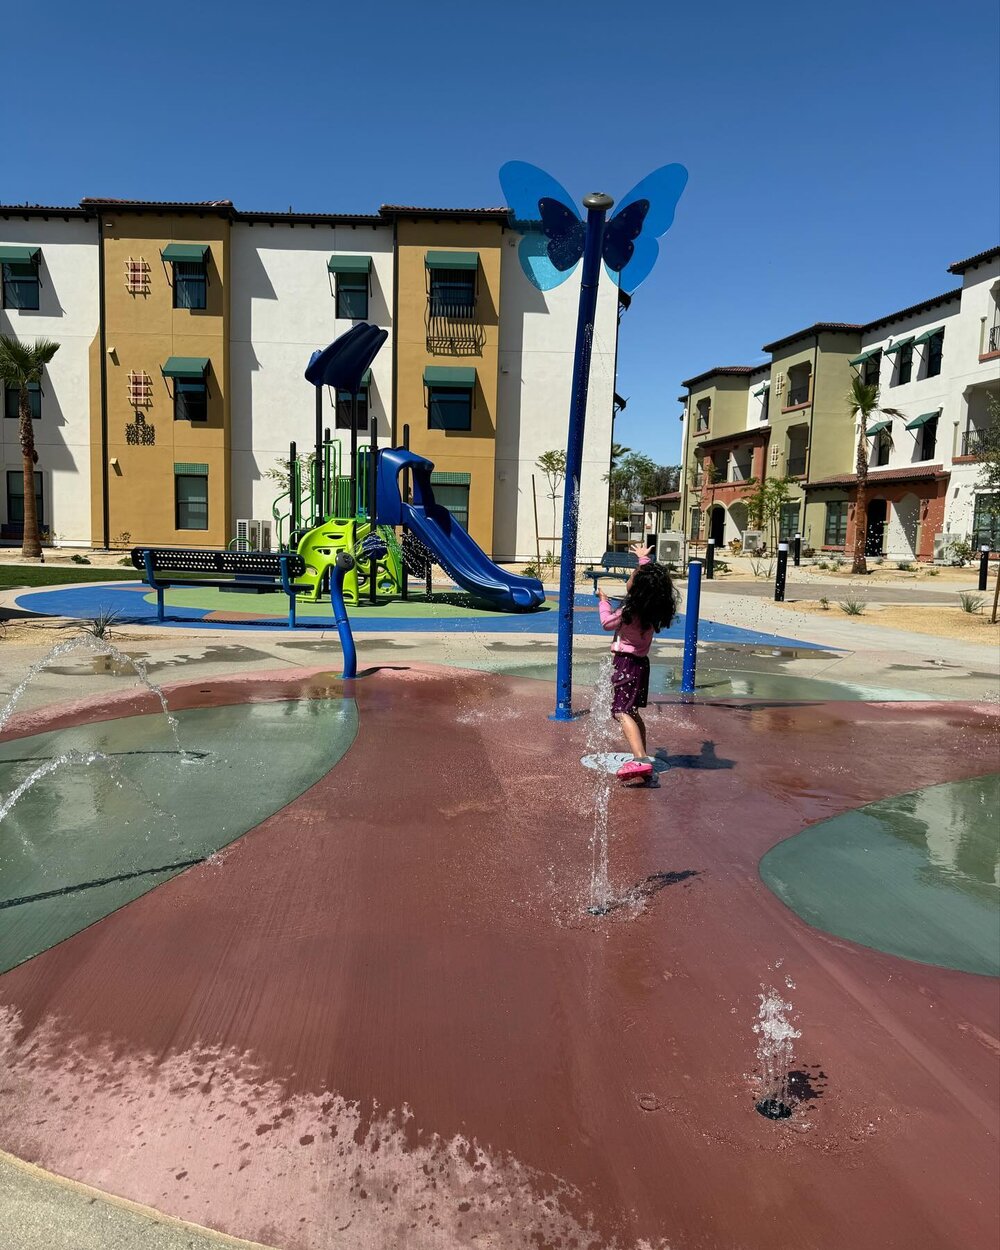 🌸 Spring has sprung in the Coachella Valley! ☀️ Recently, we had a delightful time watching the little ones enjoy the splash pad at Placitas Dolores Huerta in Coachella, while at Monarch in Palm Springs, families came together for some spring flower